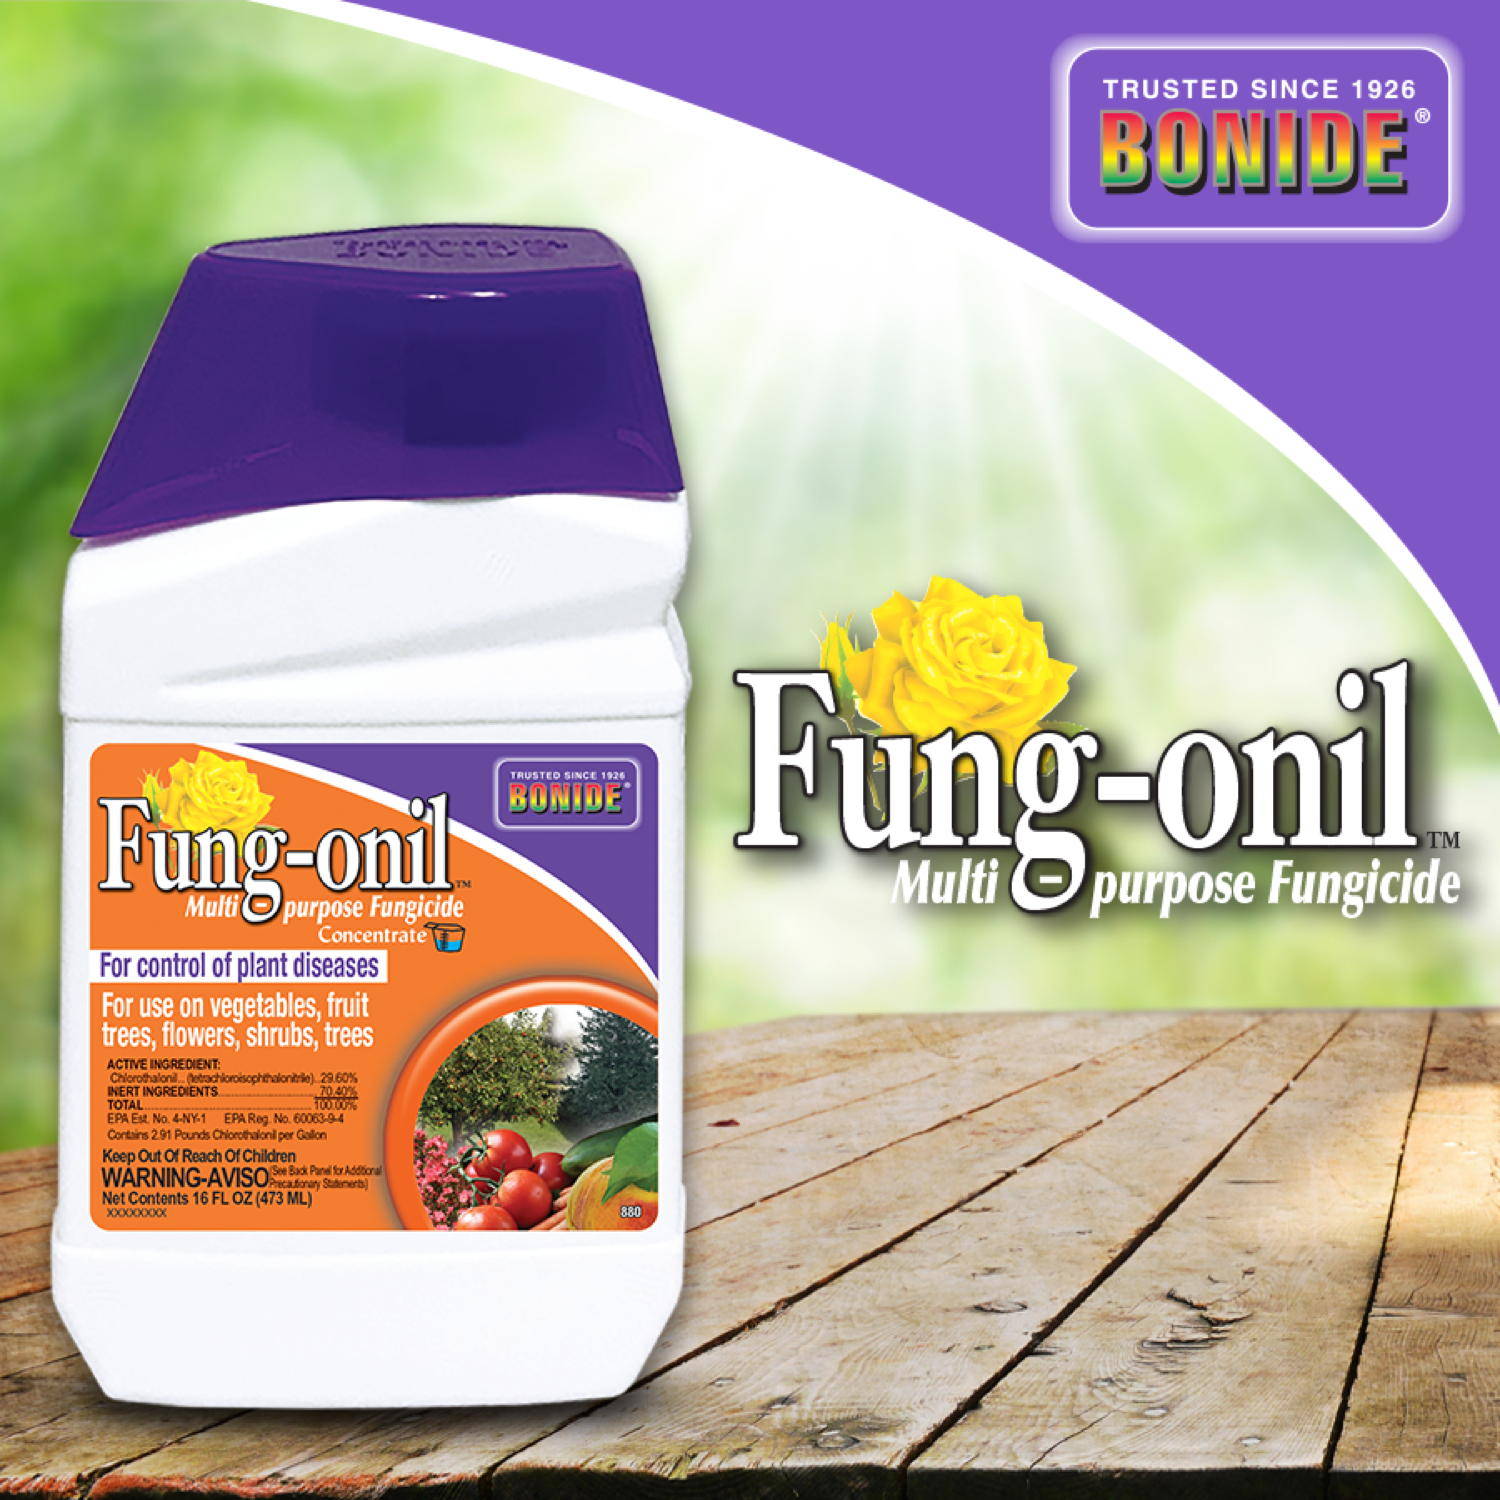 Fung-onil 1 qt concentrate